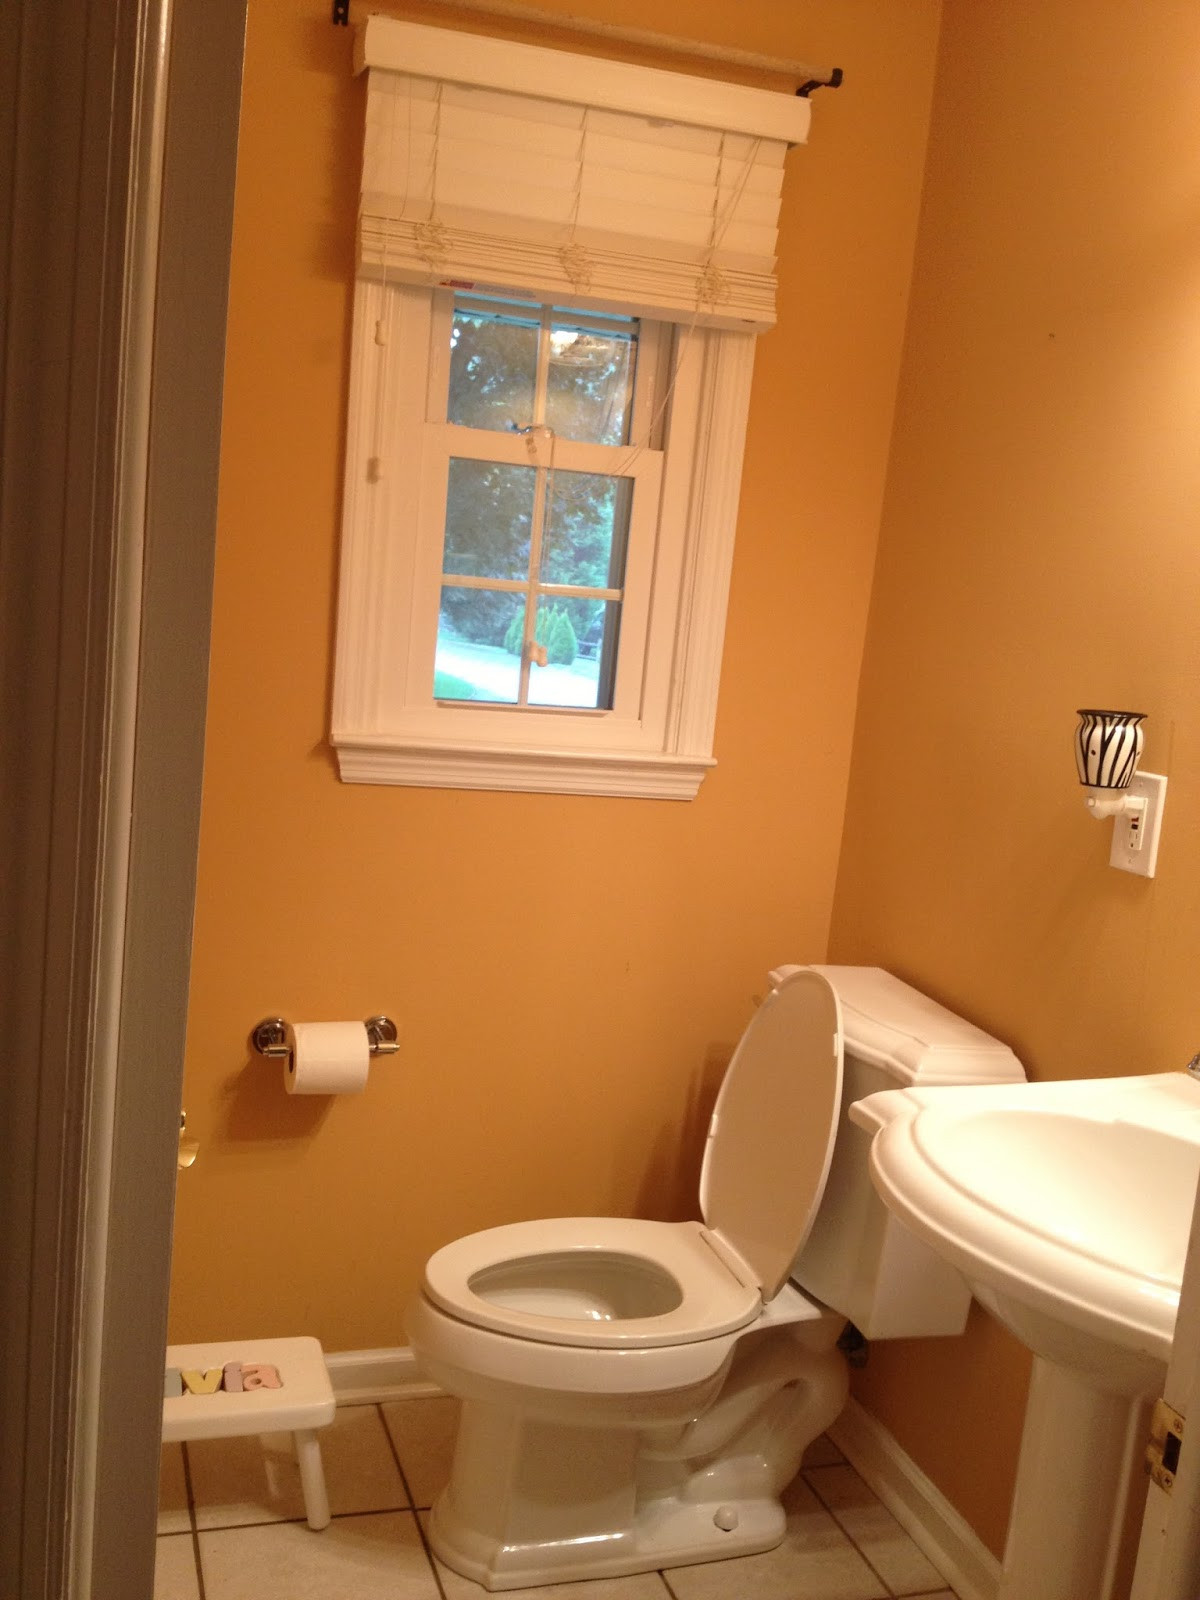 Small Bathroom Makeovers Pictures
 Two It Yourself REVEAL $100 Small Bathroom Makeover